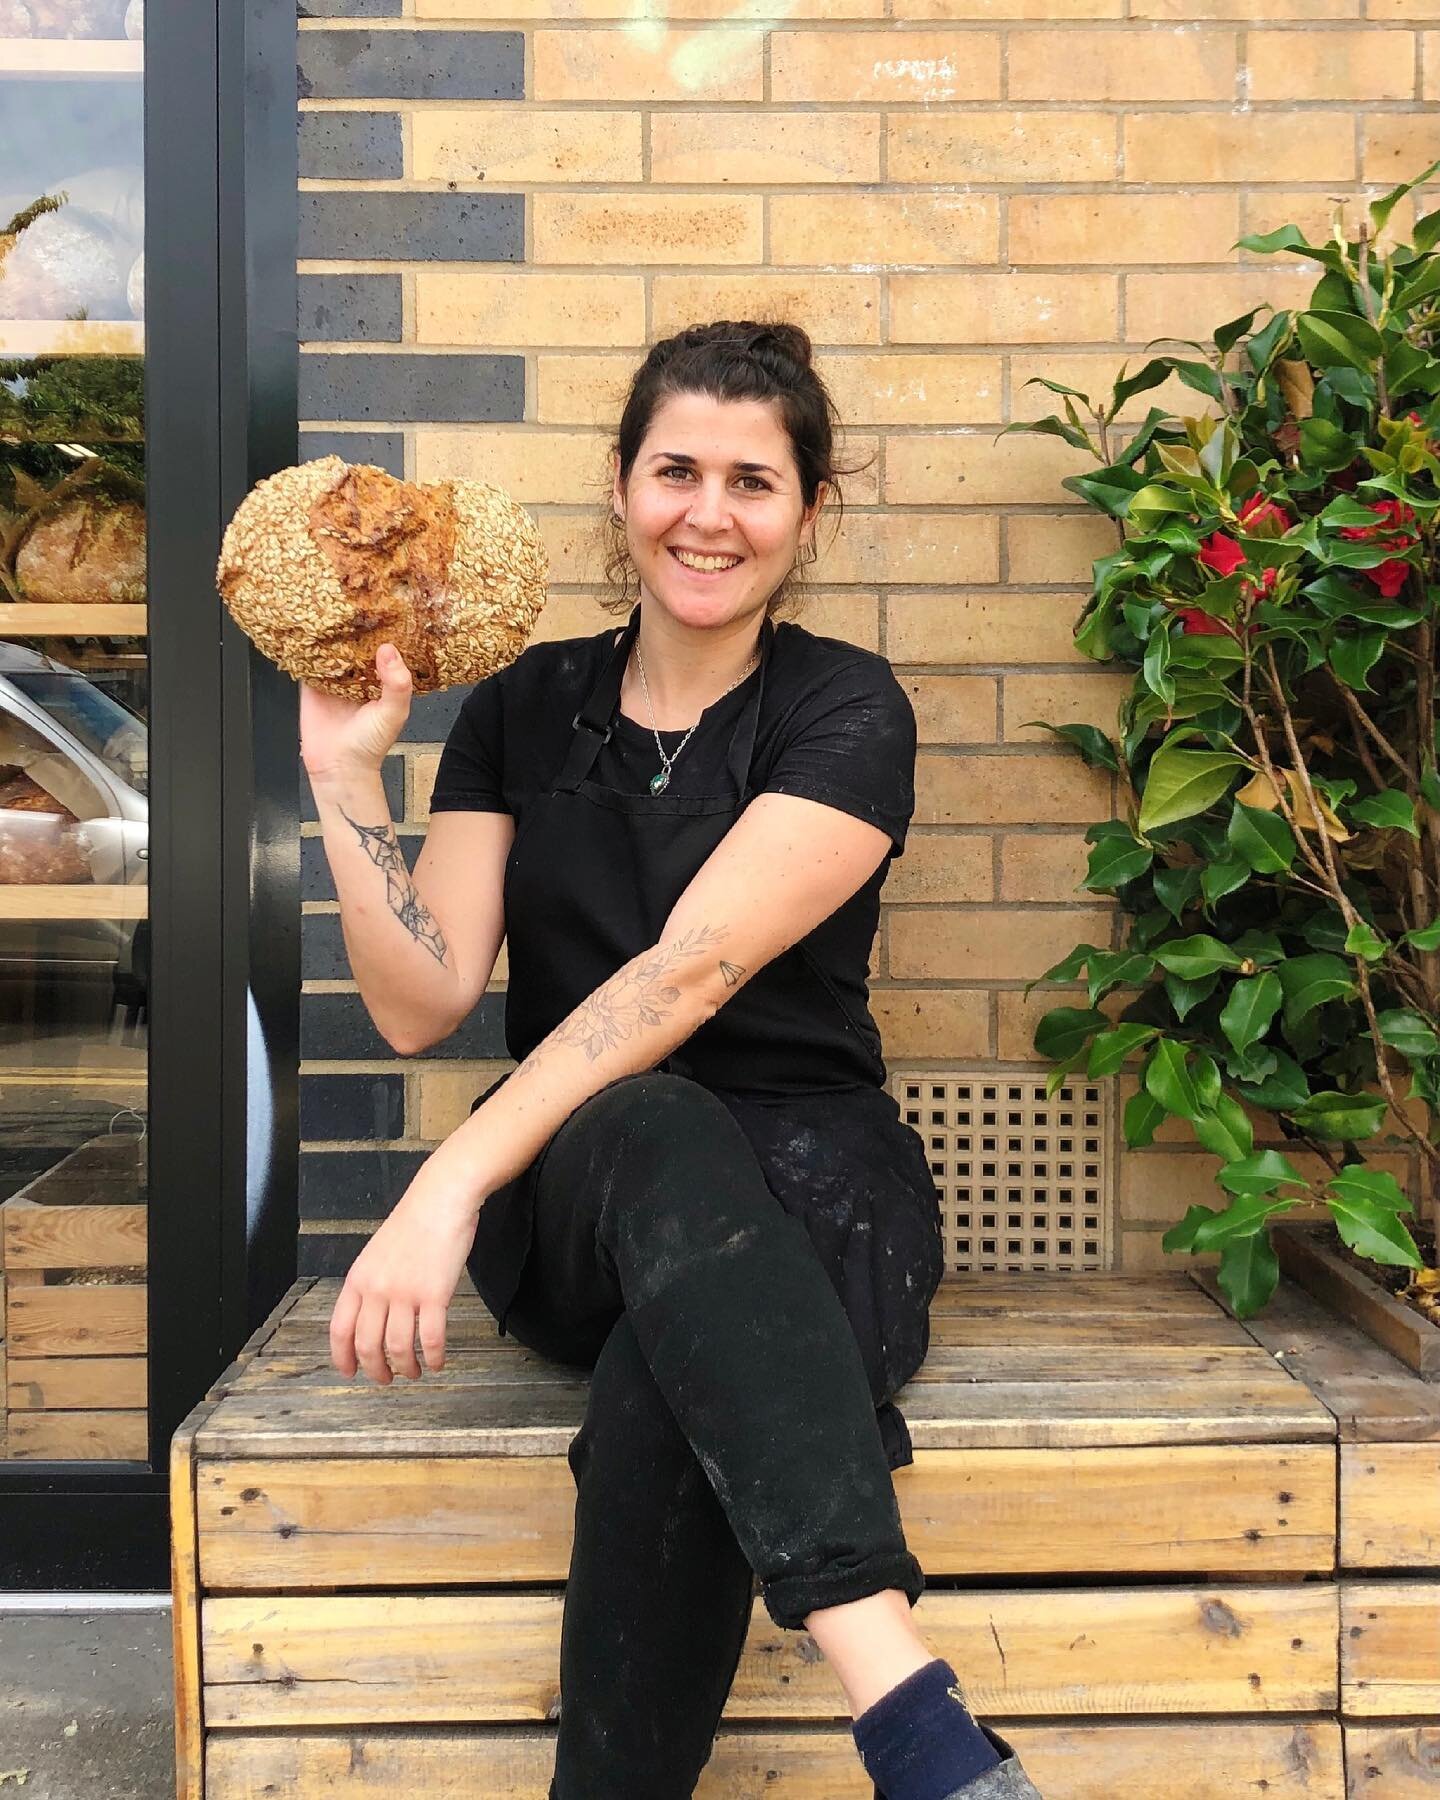 &mdash; MEET CARLA &mdash;

Mixer, shaper &amp; baker! Carla hasn&rsquo;t been with us long but we&rsquo;re so grateful she&rsquo;s part of our team &mdash; our very own Argentinian queen!